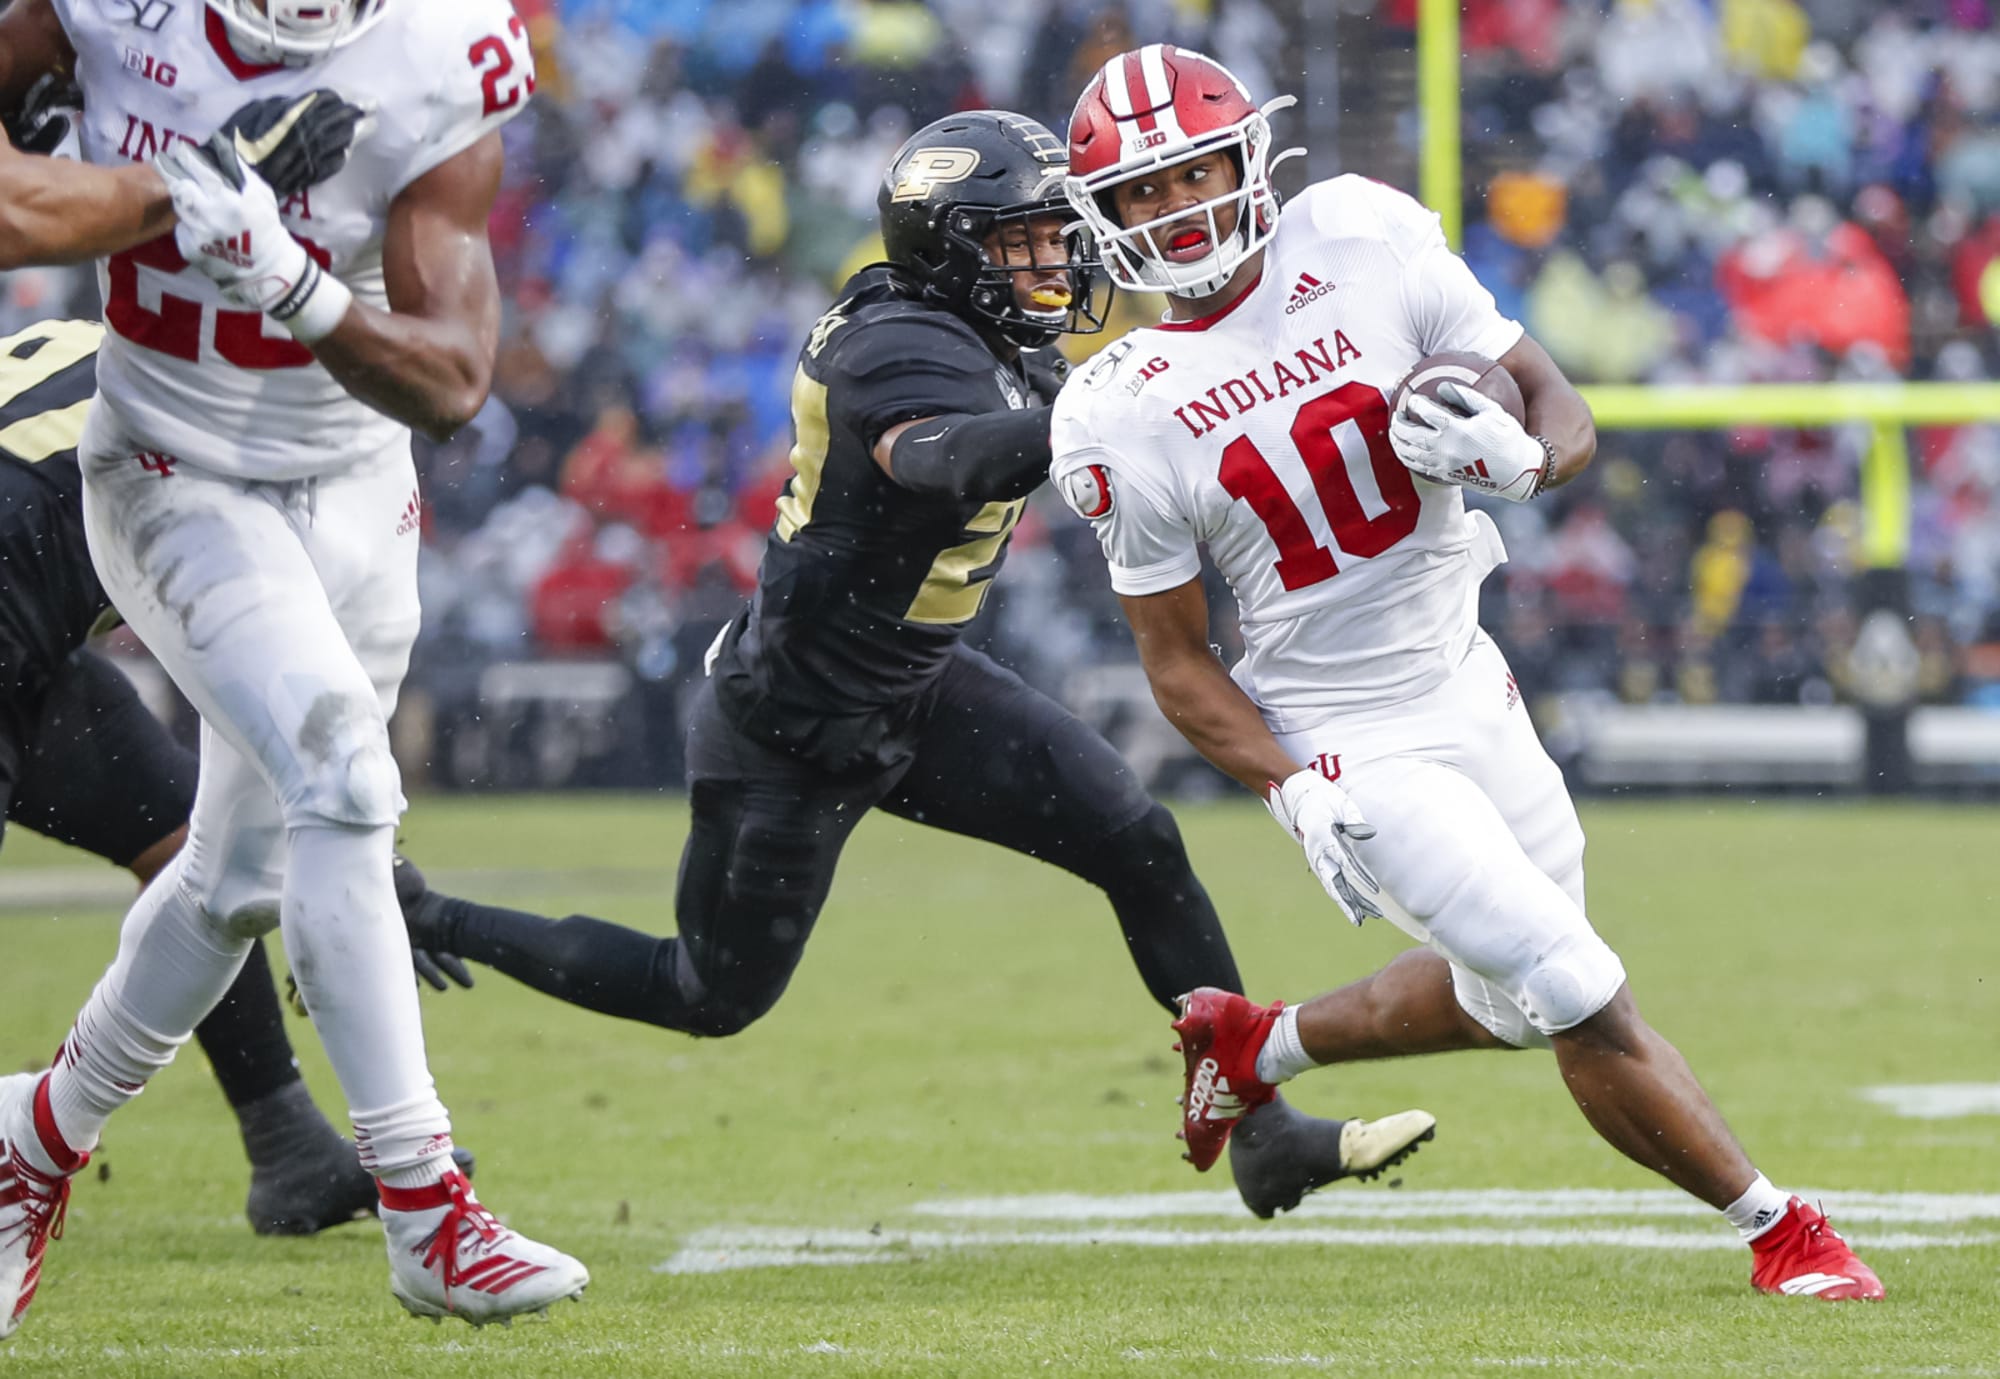 Indiana Football 3 takeaways from overtime win over Purdue in Week 14